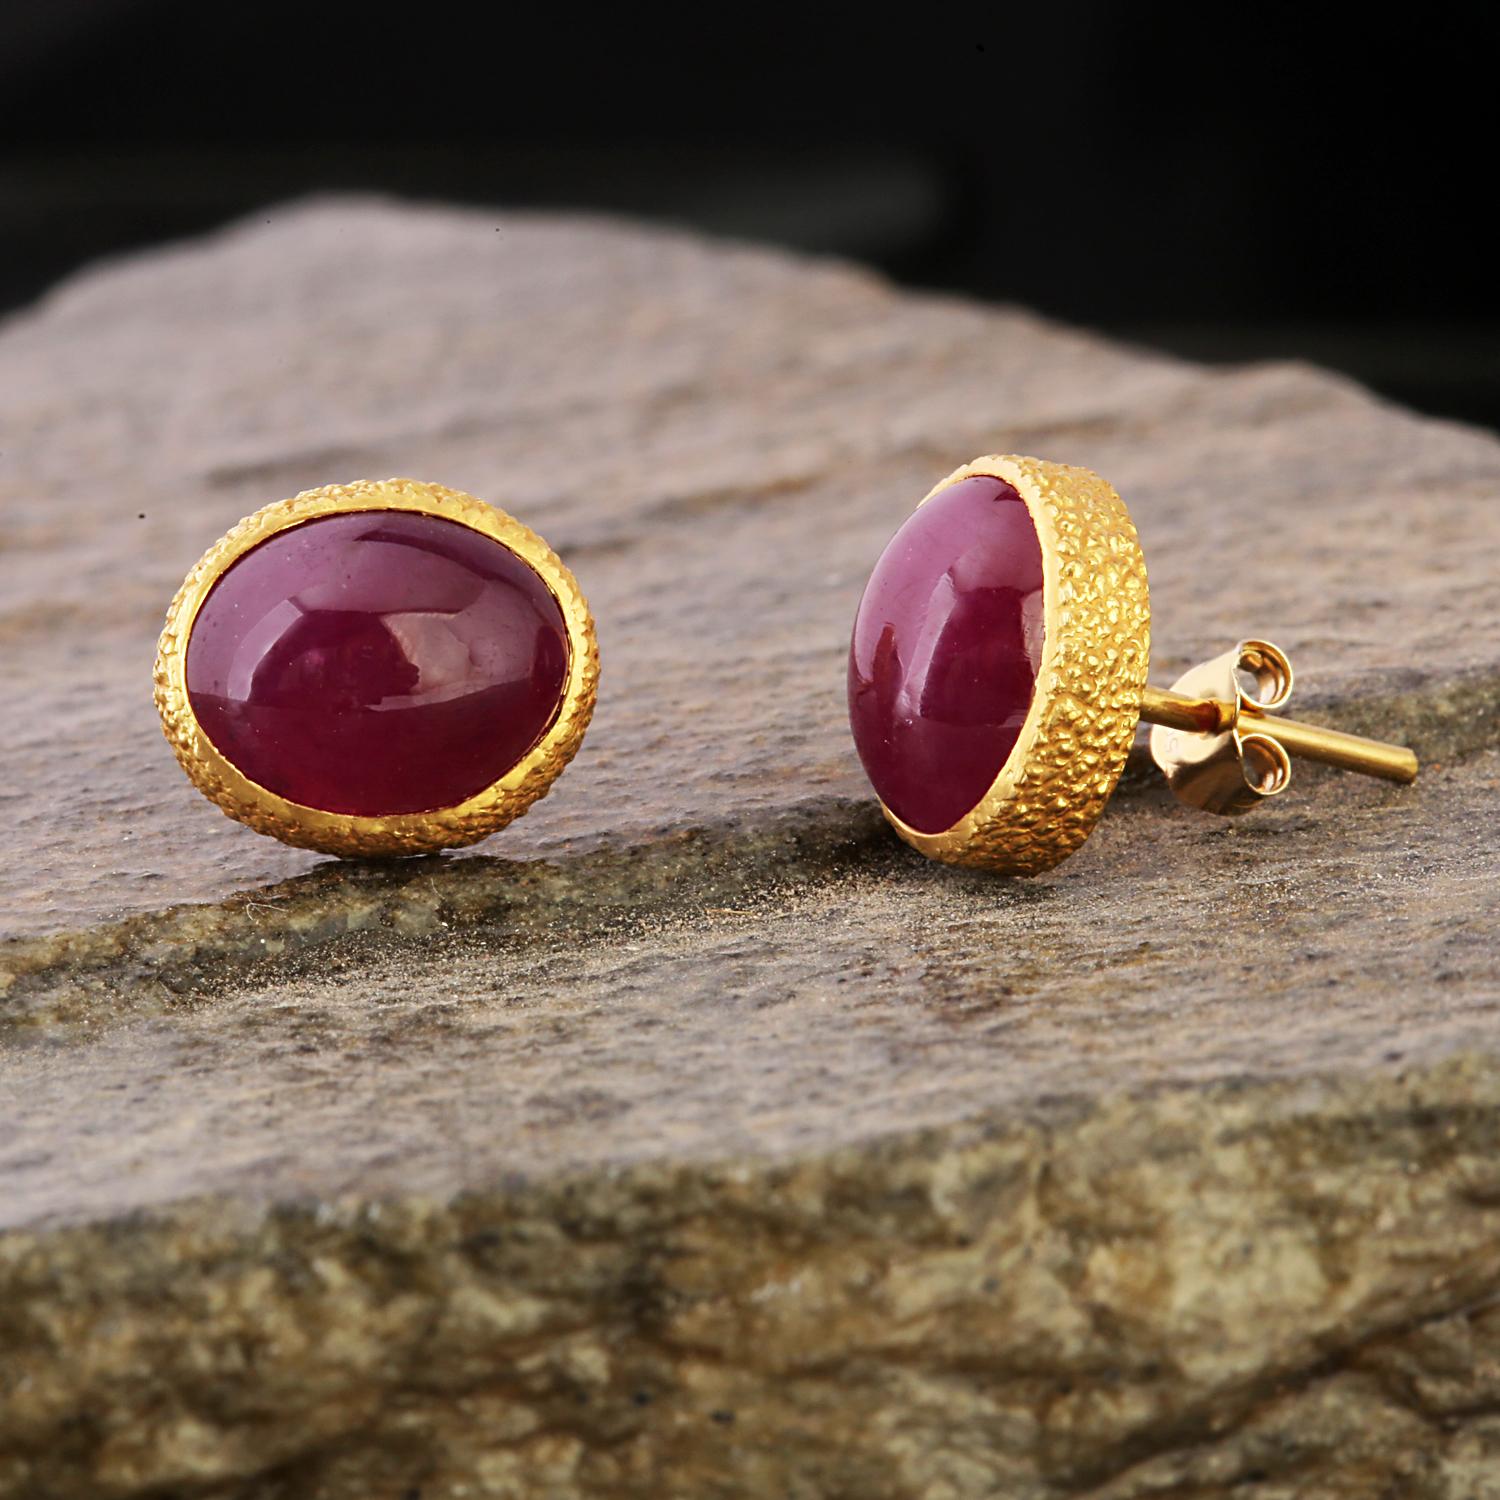 Brilliant Cut Ruby Stud Earrings with 18k Gold For Sale